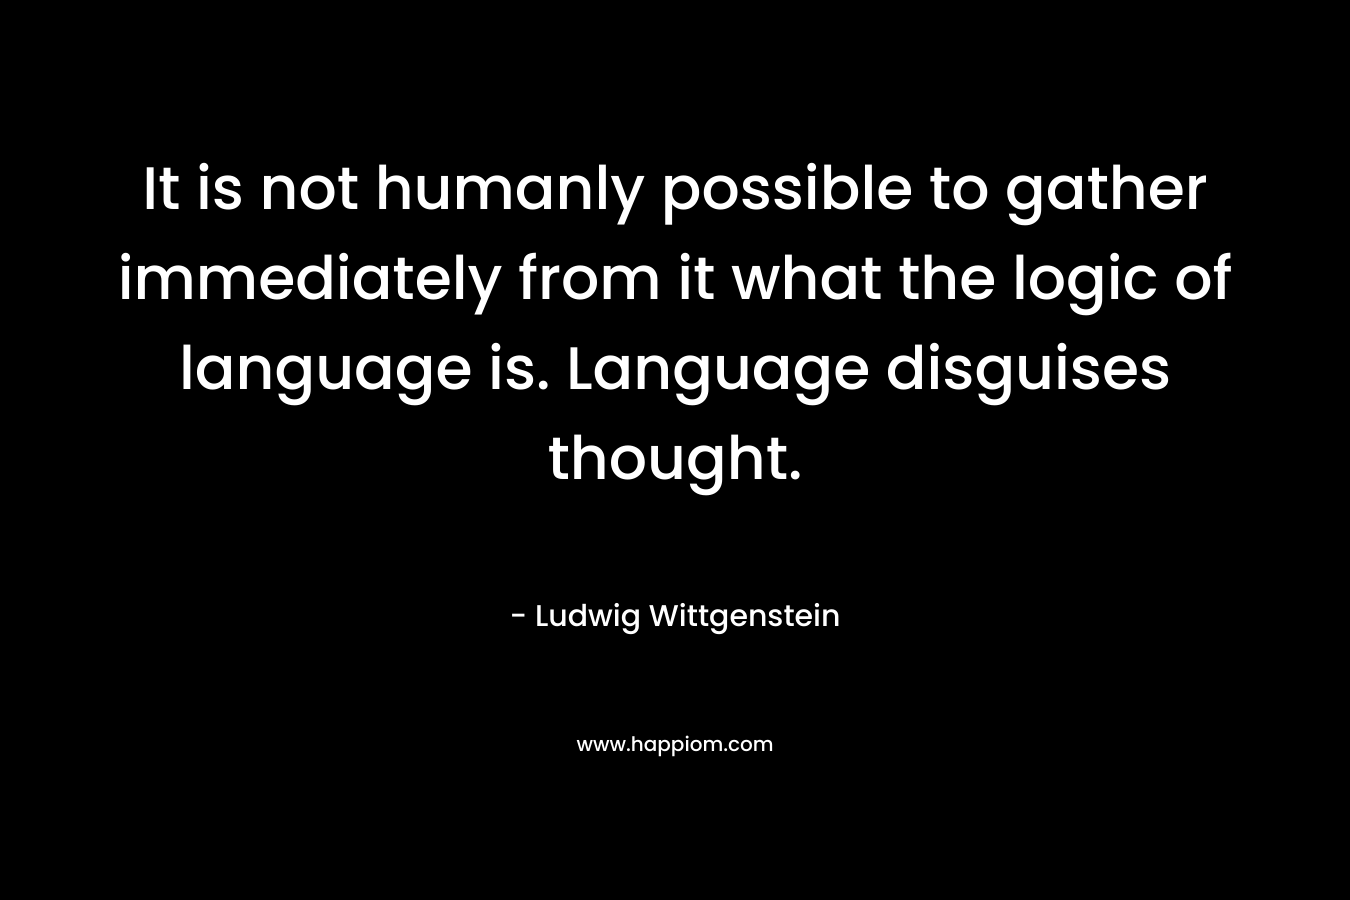 It is not humanly possible to gather immediately from it what the logic of language is. Language disguises thought.